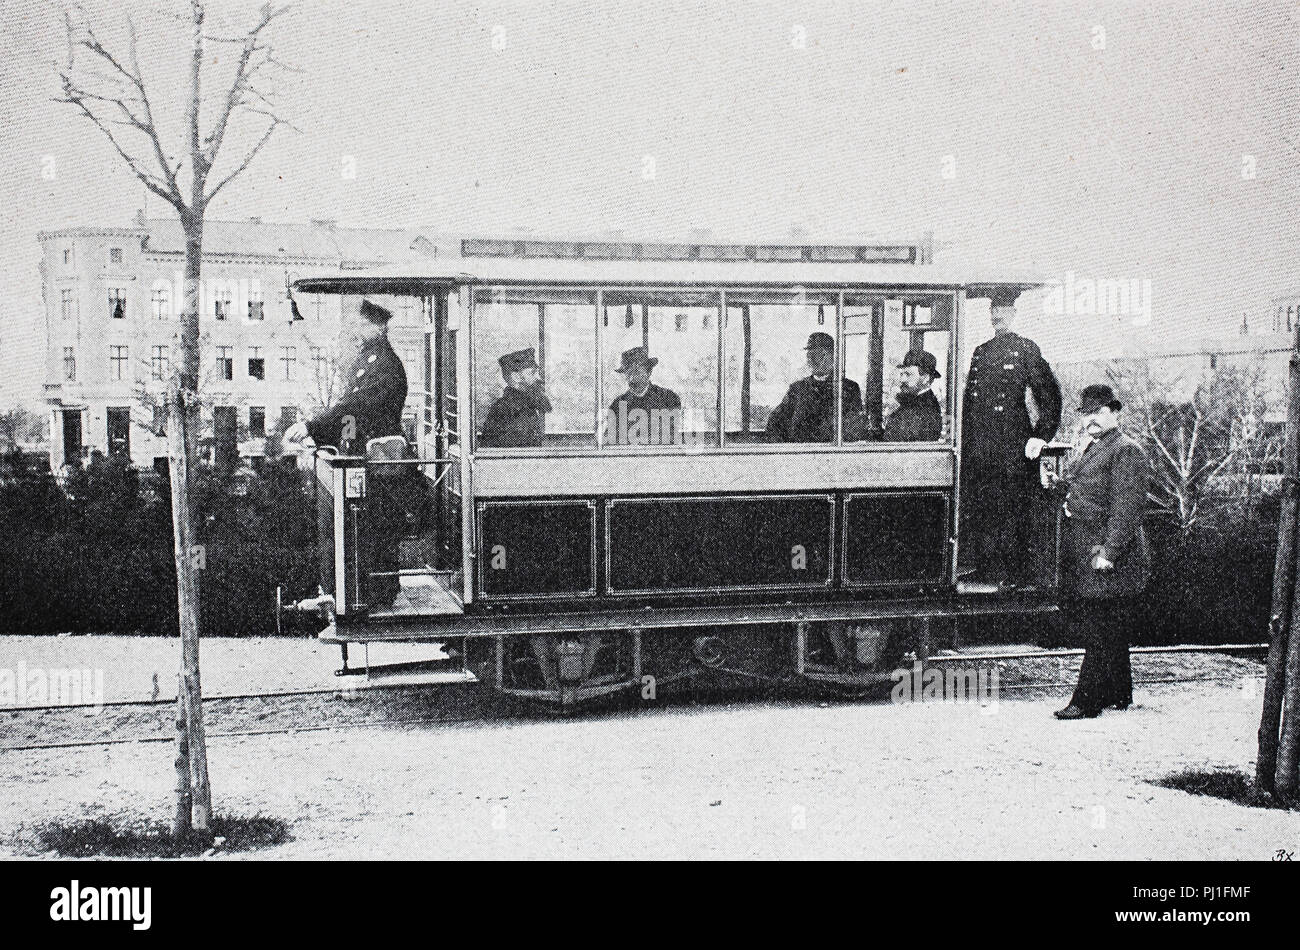 The Gross Lichterfelde Tramway was the world's first electric tramway,s built by the Siemens & Halske company in Lichterfelde, Berlin, and went in service on 16 May 1881, Germany, digital improved reproduction of an woodprint from the year 1890 Stock Photo